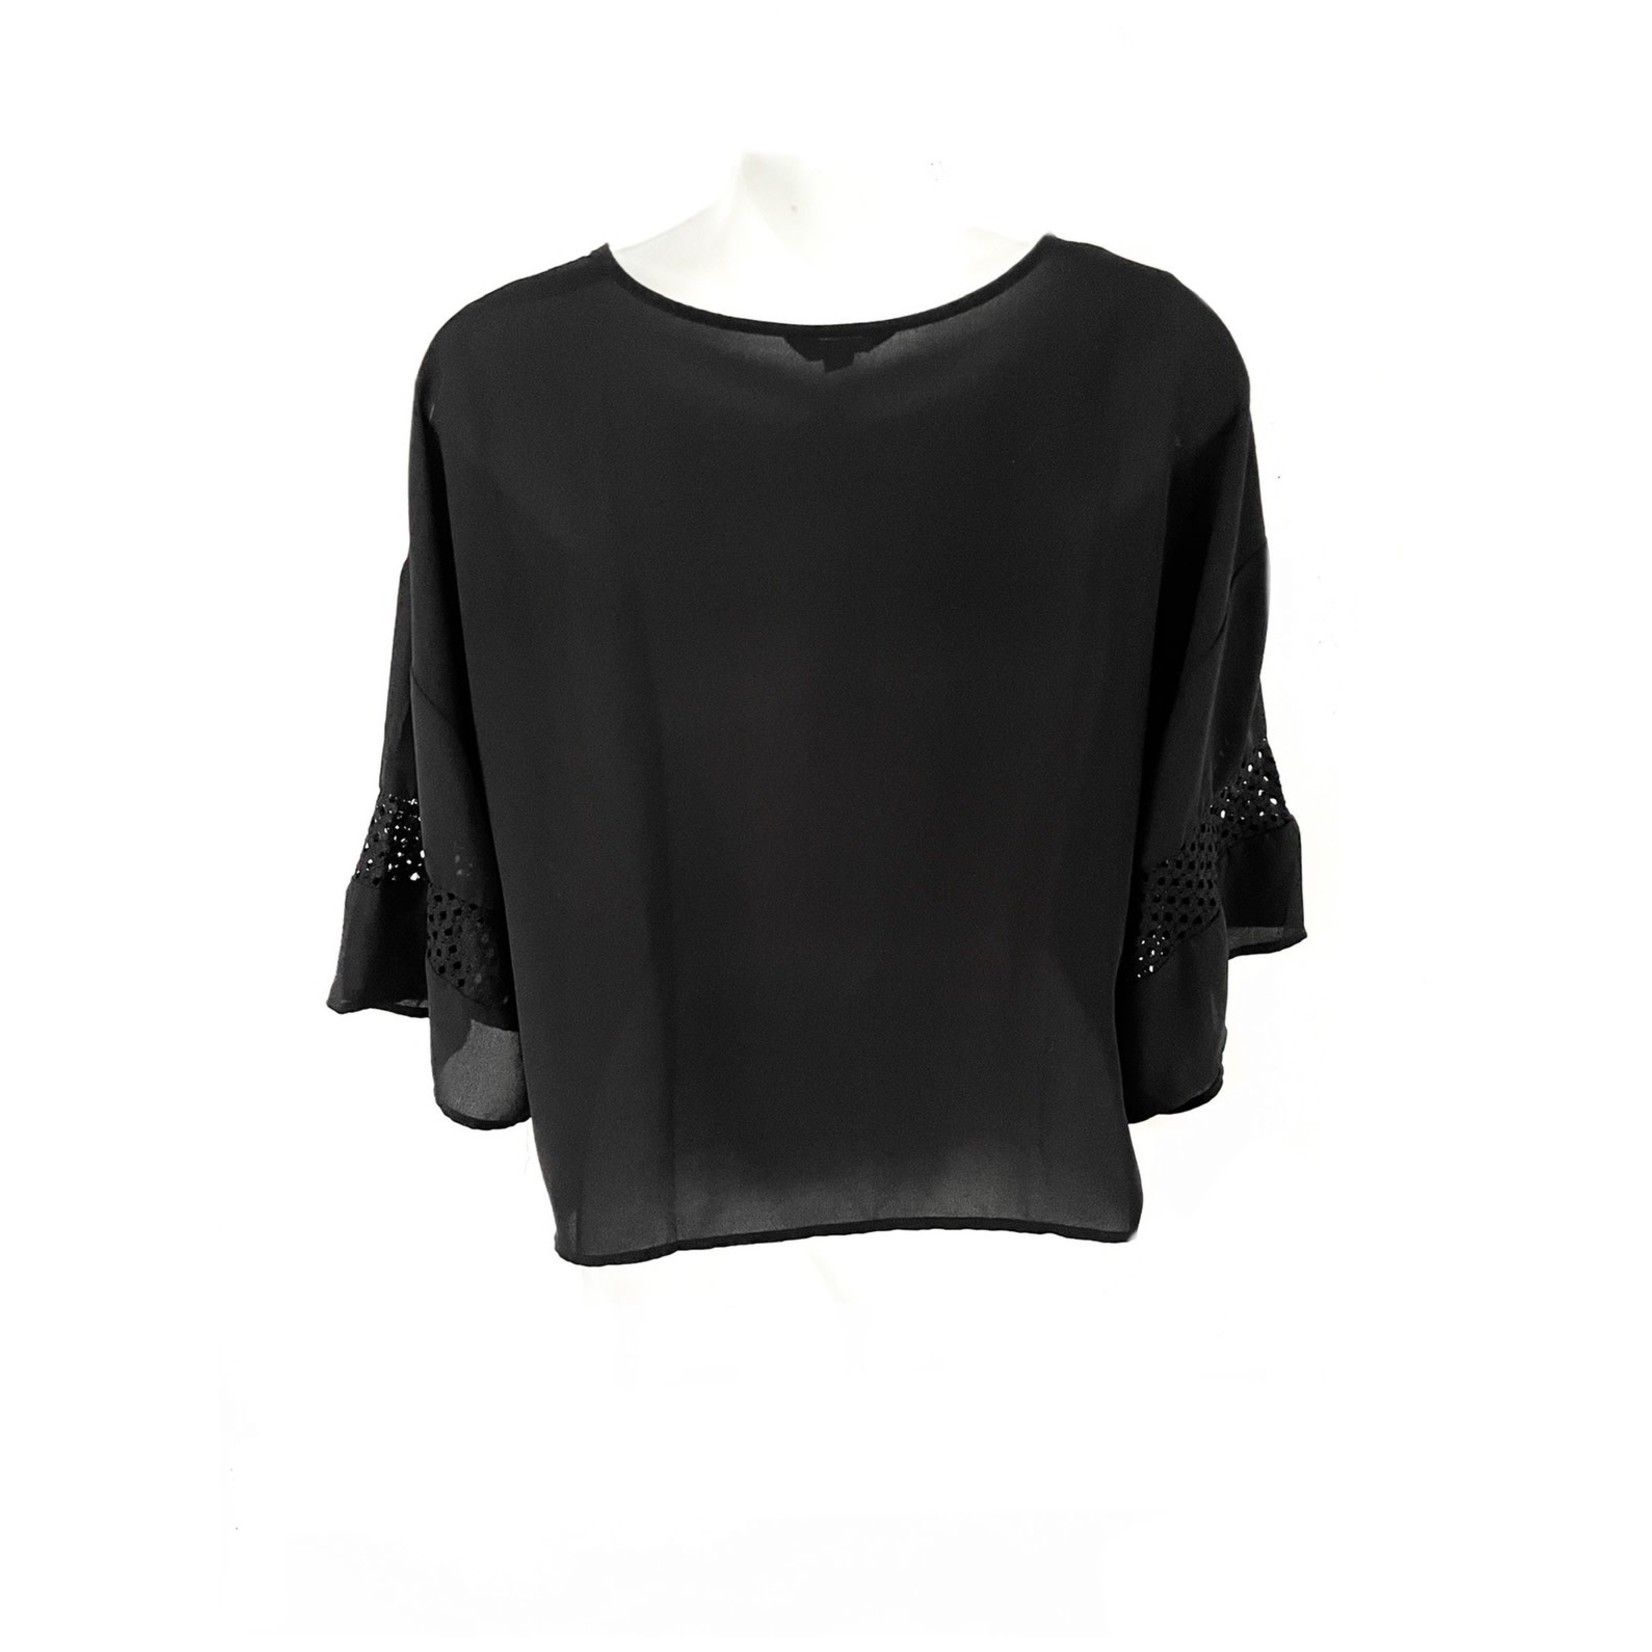 Kenneth Cole Kenneth Cole Reaction Crop Blouse - Size XS